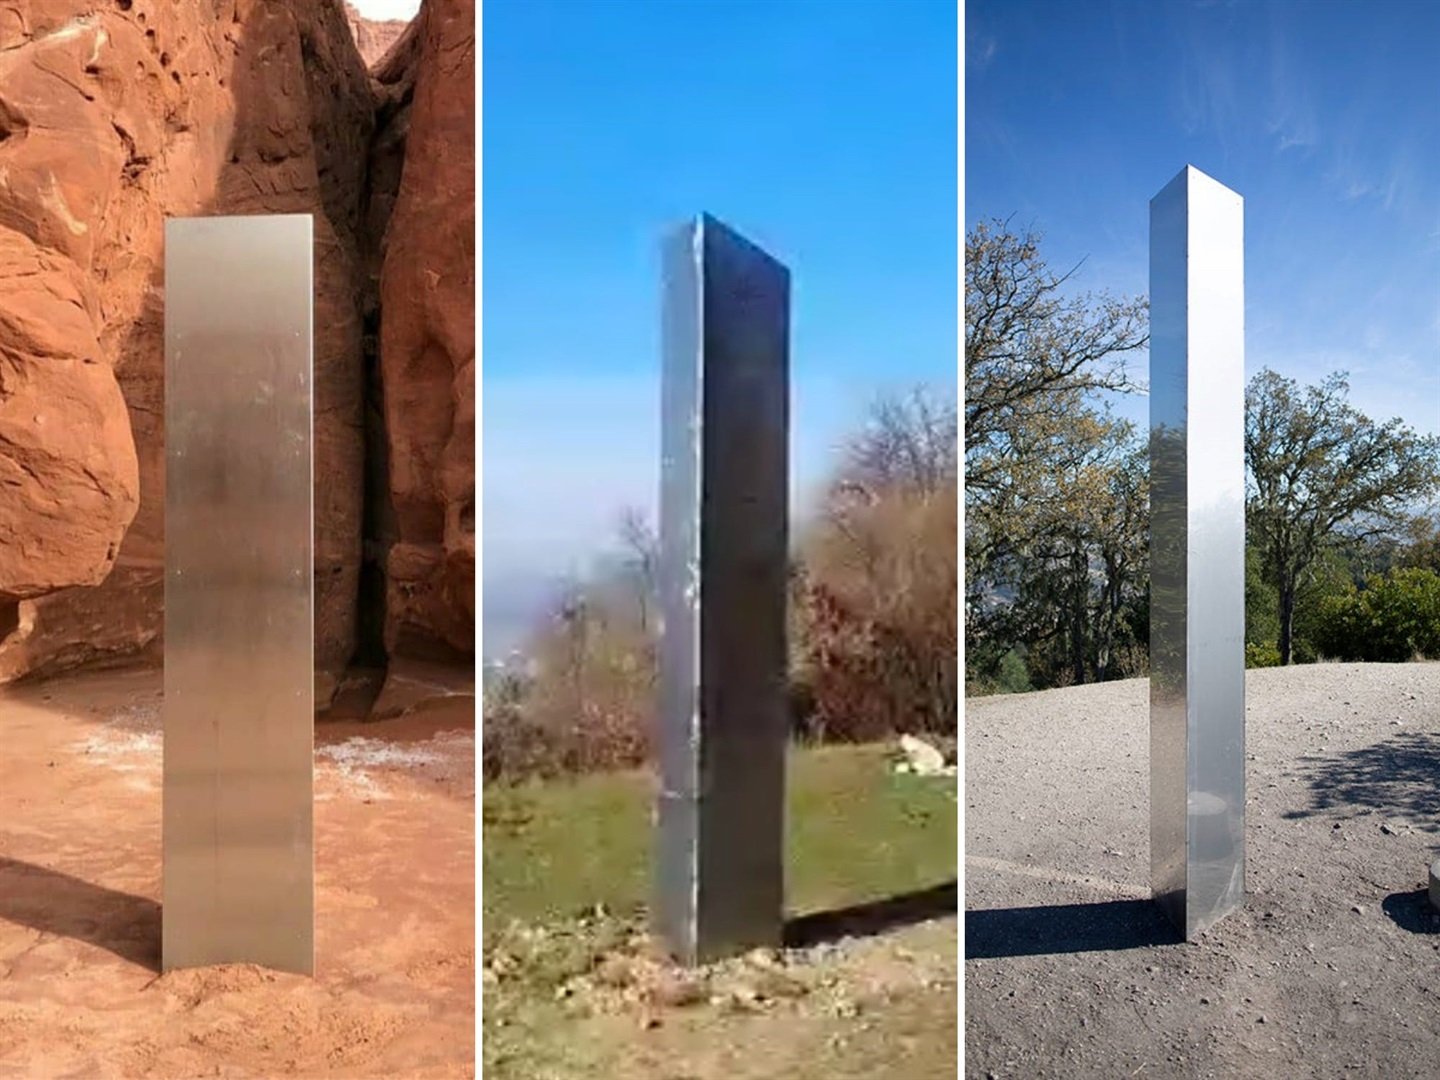 Another mysterious monolith has appeared. This time it's ...